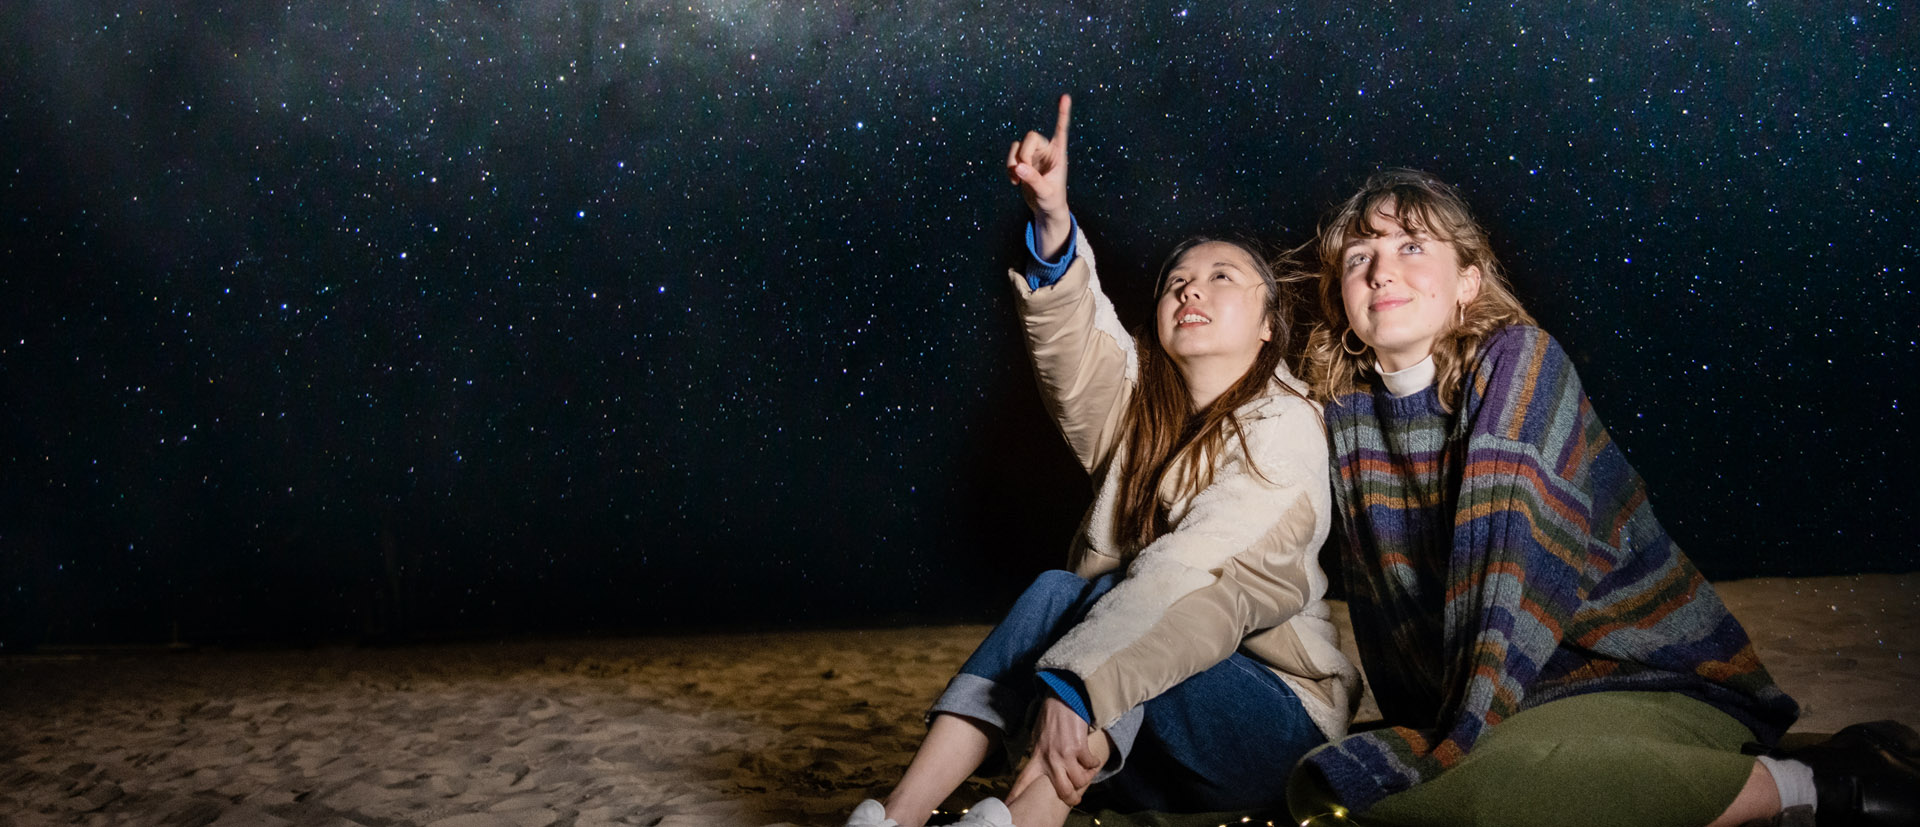 They believe in astrology: ‘It’s no more silly than thinking there’s a guy in the sky’